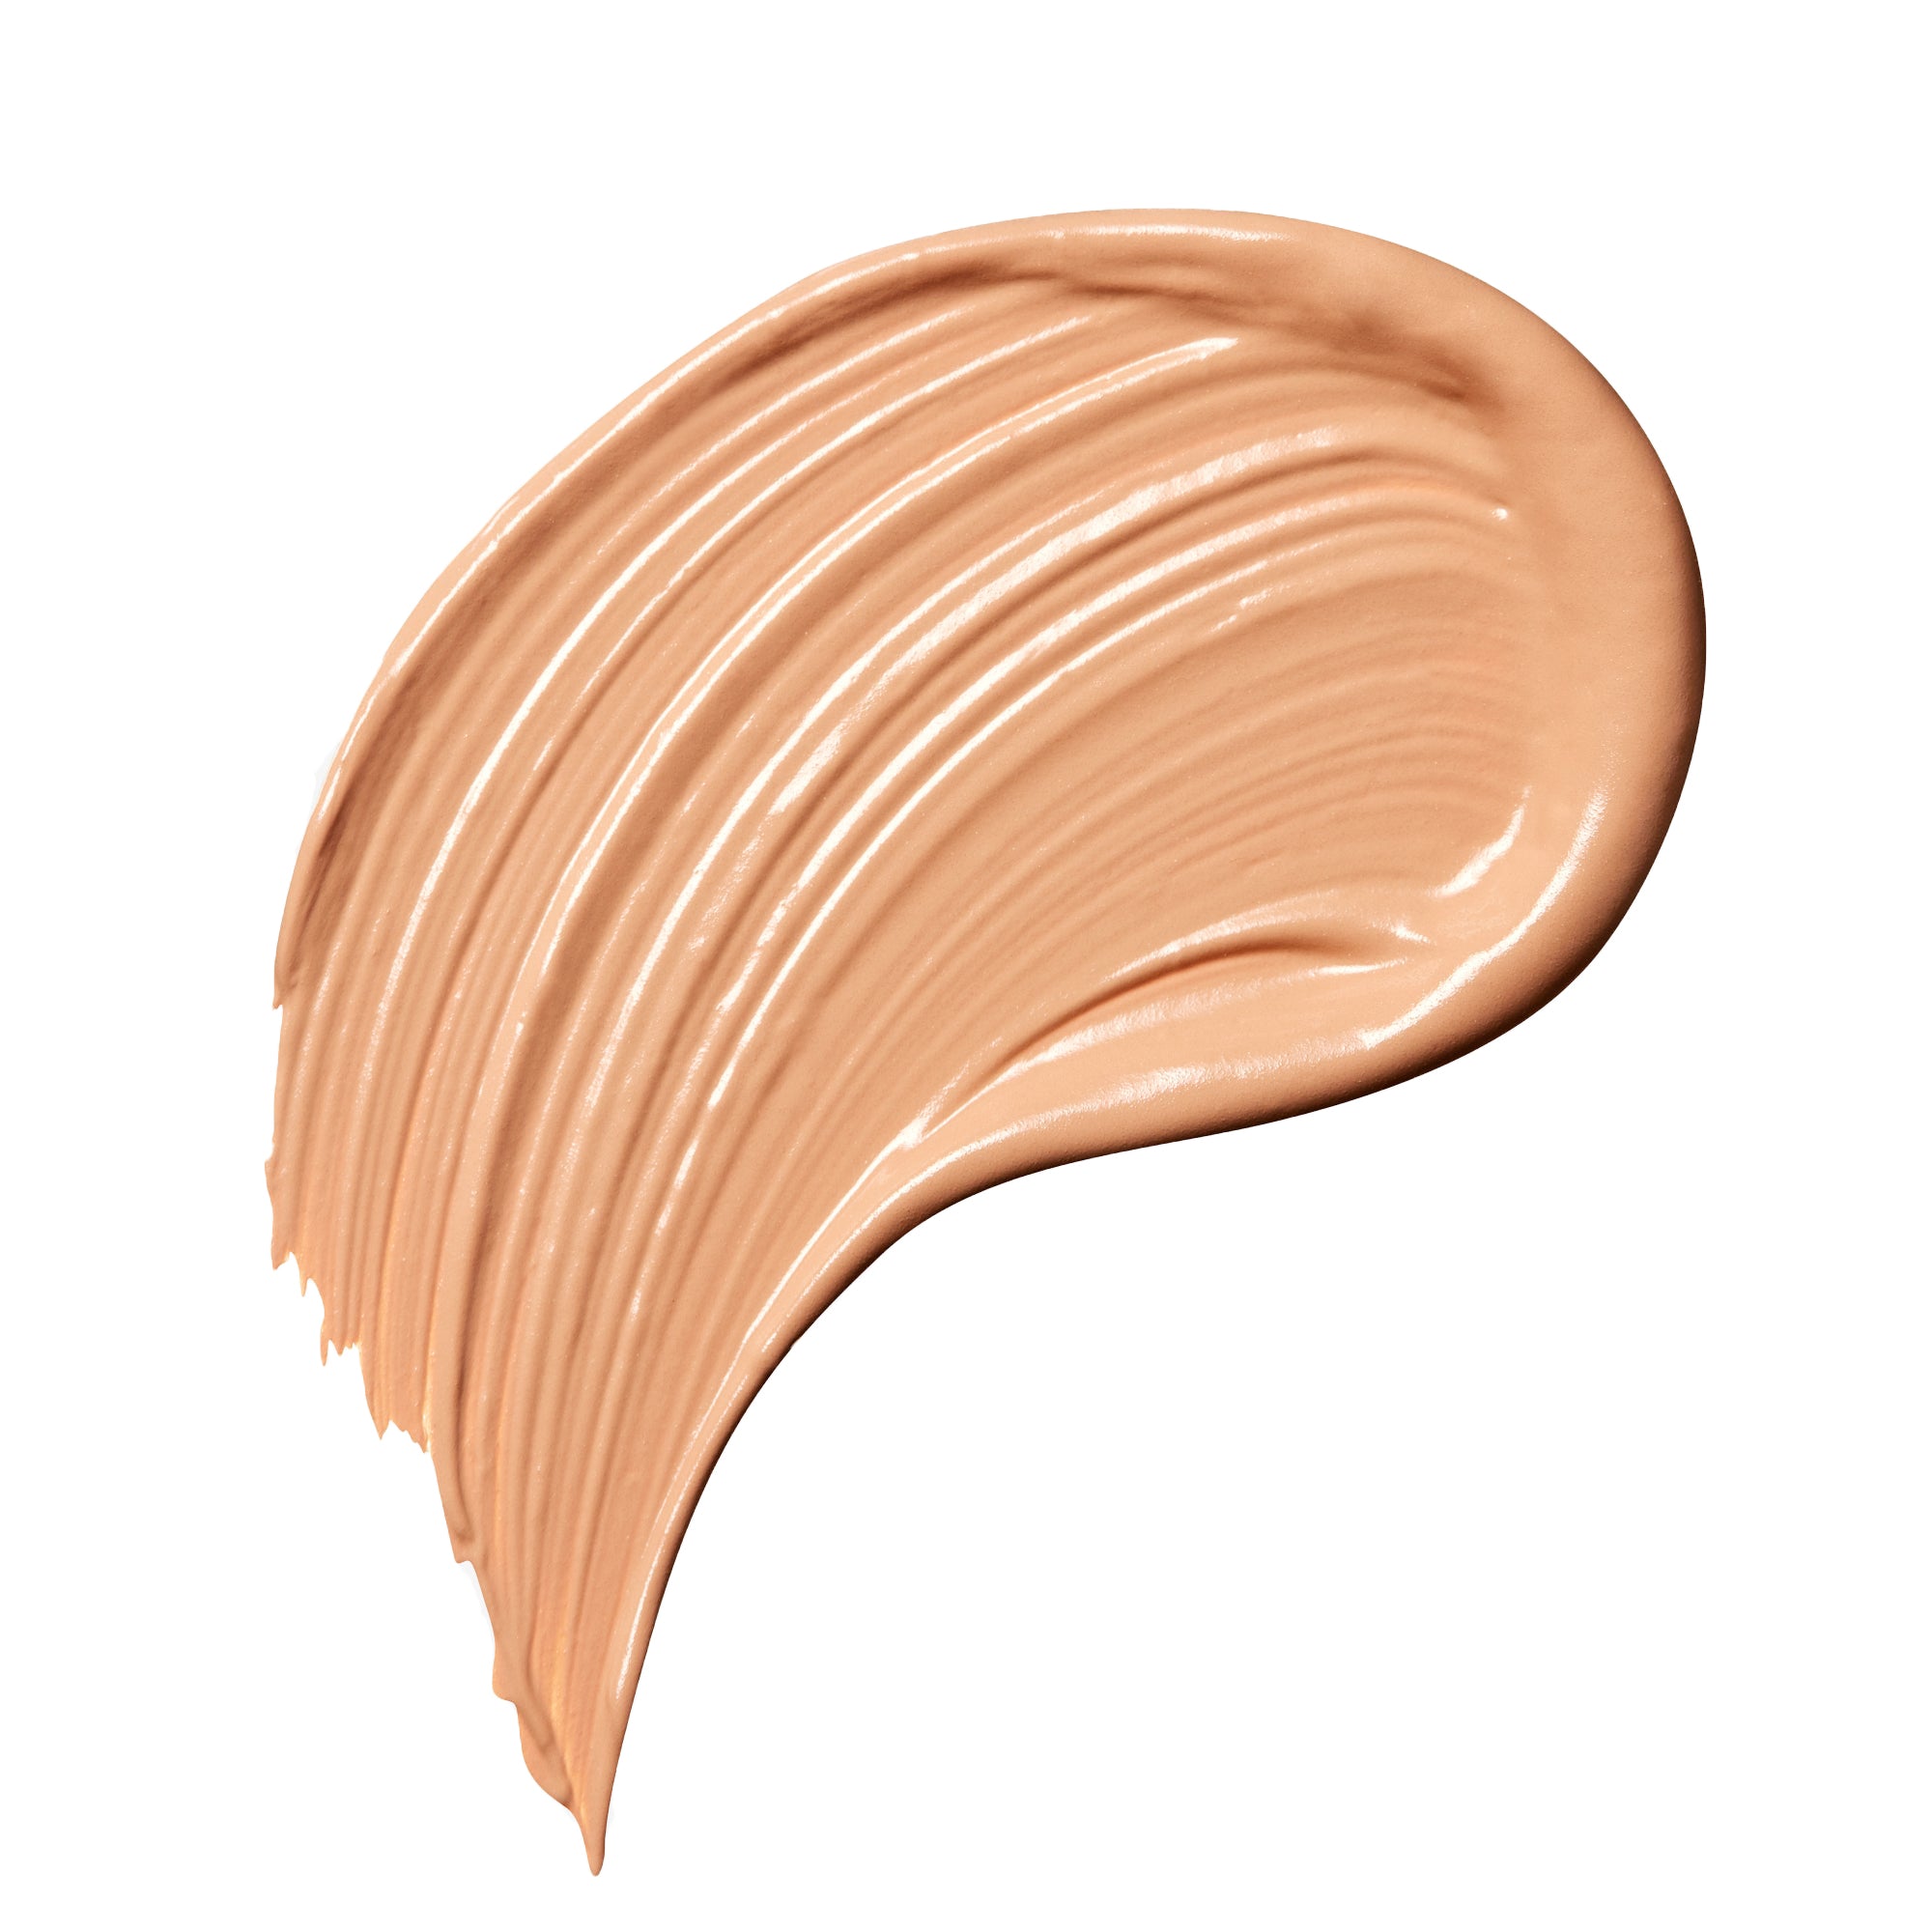 Rodial Glass Concealer / Shade 01 / Swatch